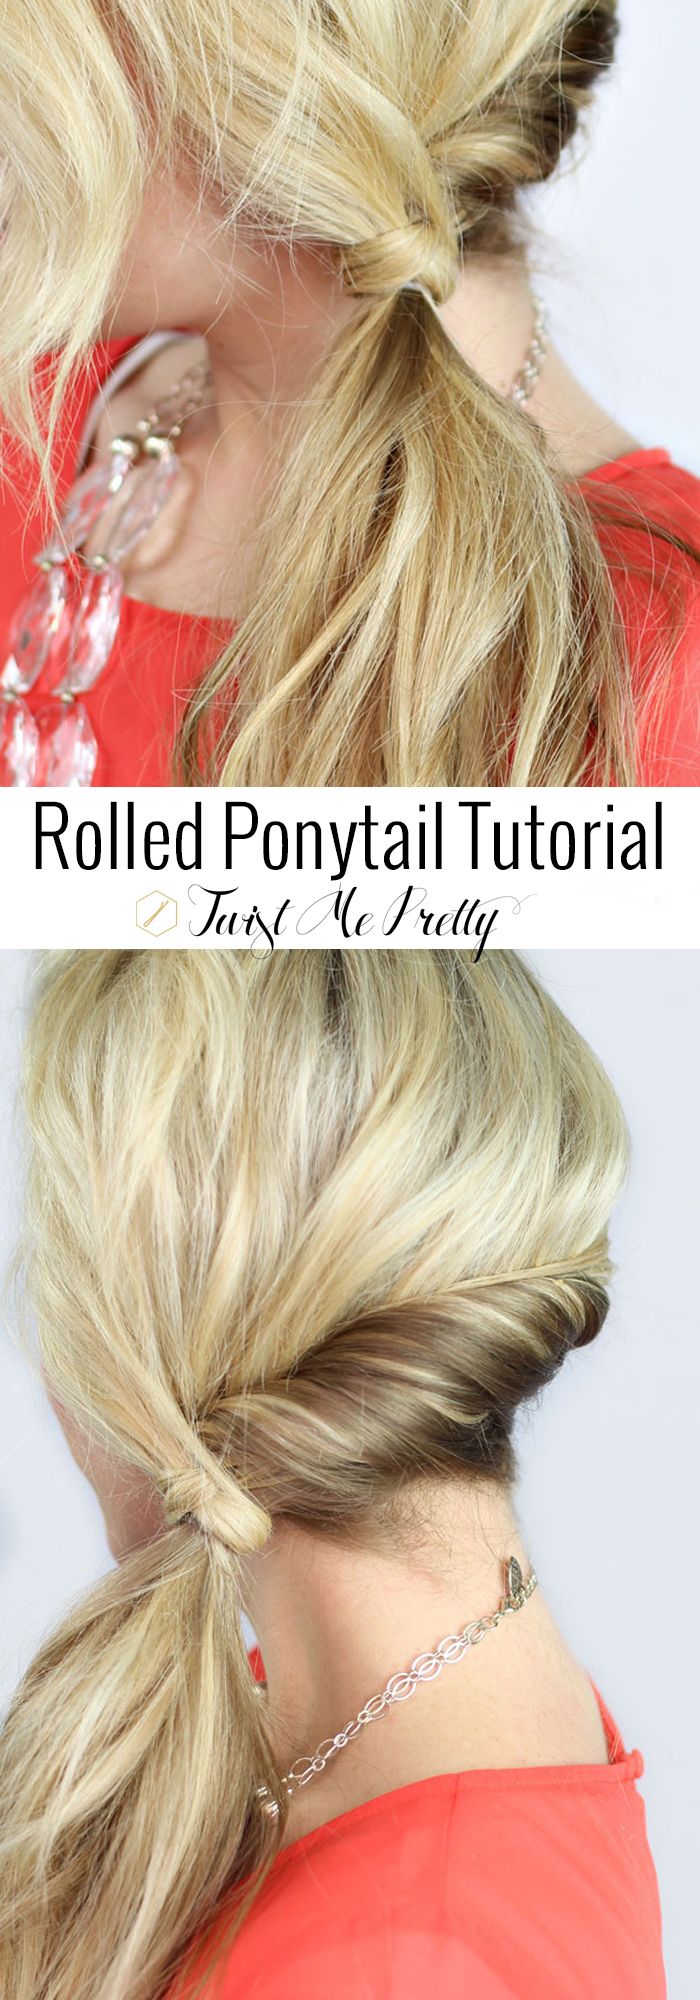 Rolled Ponytail